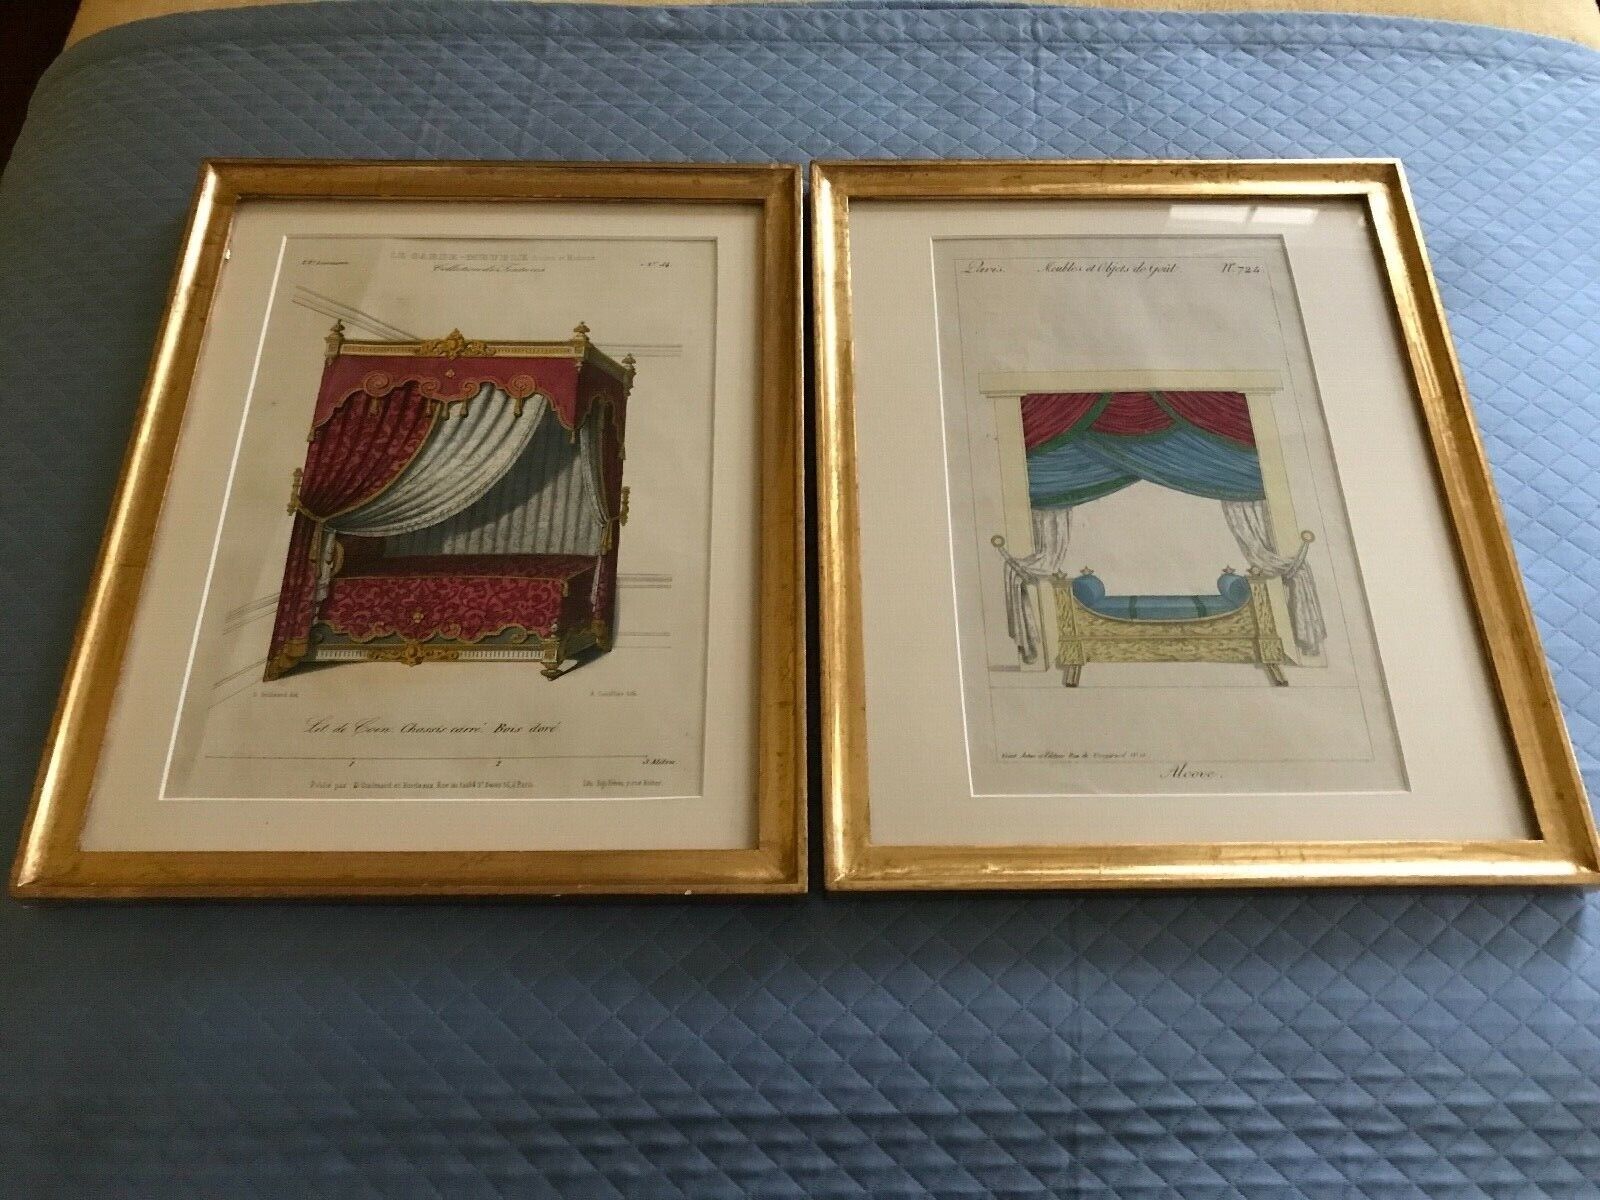 Pair of Antique architectural prints, hand colored, matted and framed. Без бренда